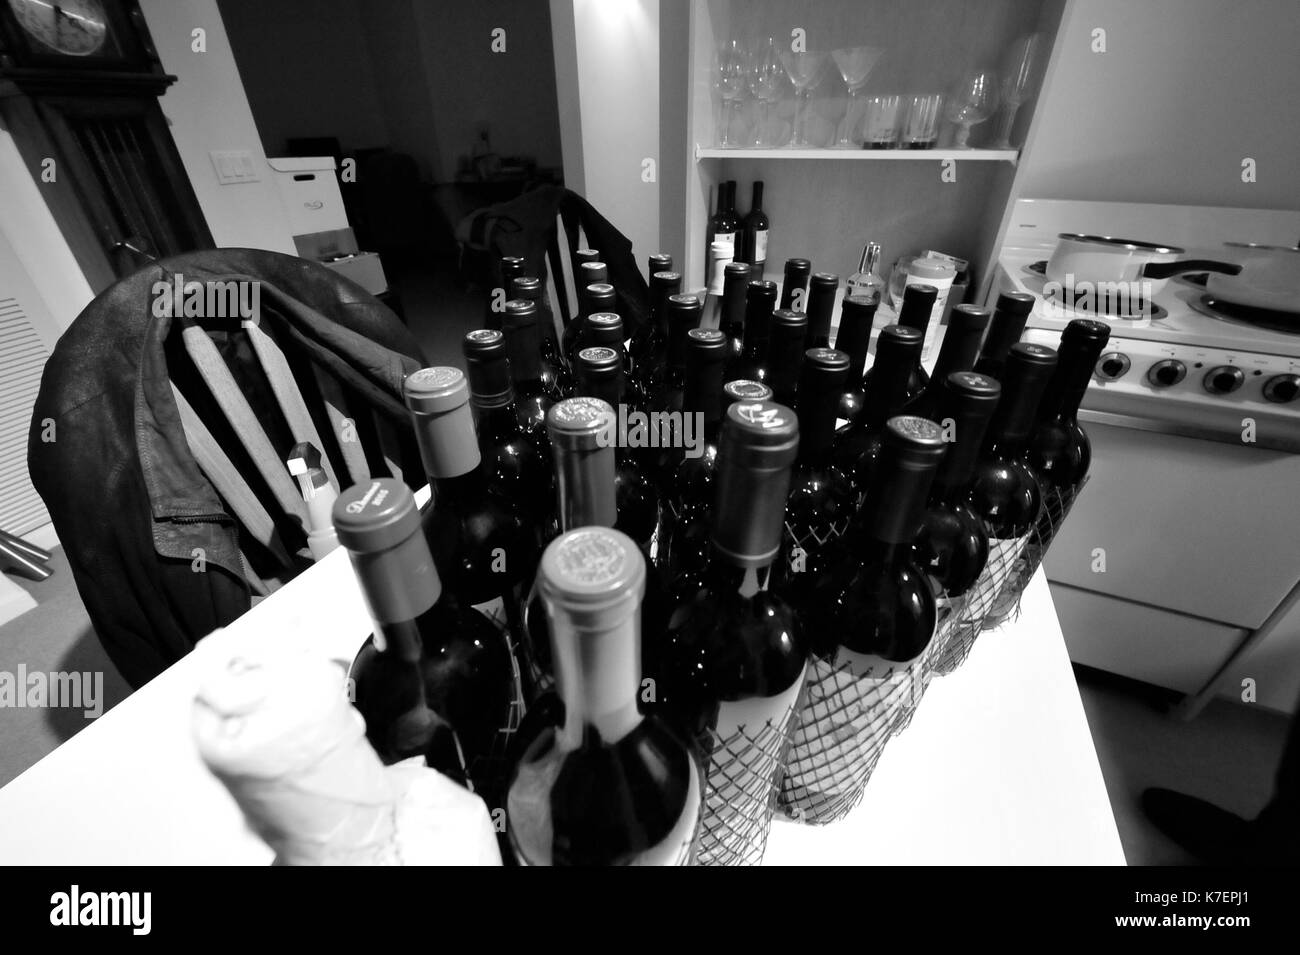 Black and white photo of bottles of wine on a kitchen counter Stock Photo